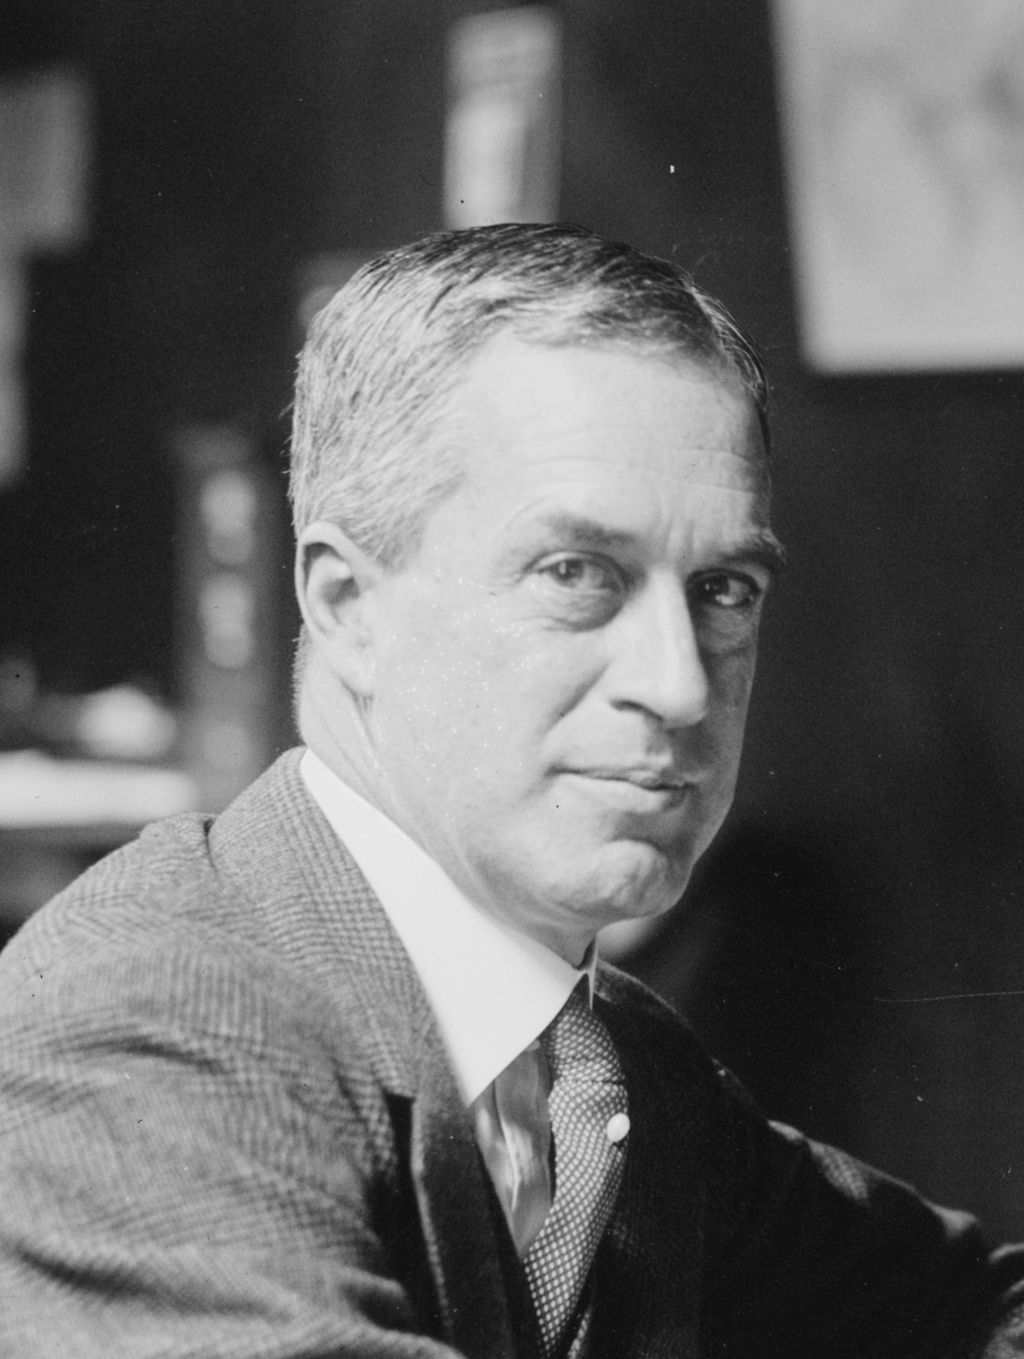 Black and white photograph of Arthur Woods wearing a suit and looking at the camera